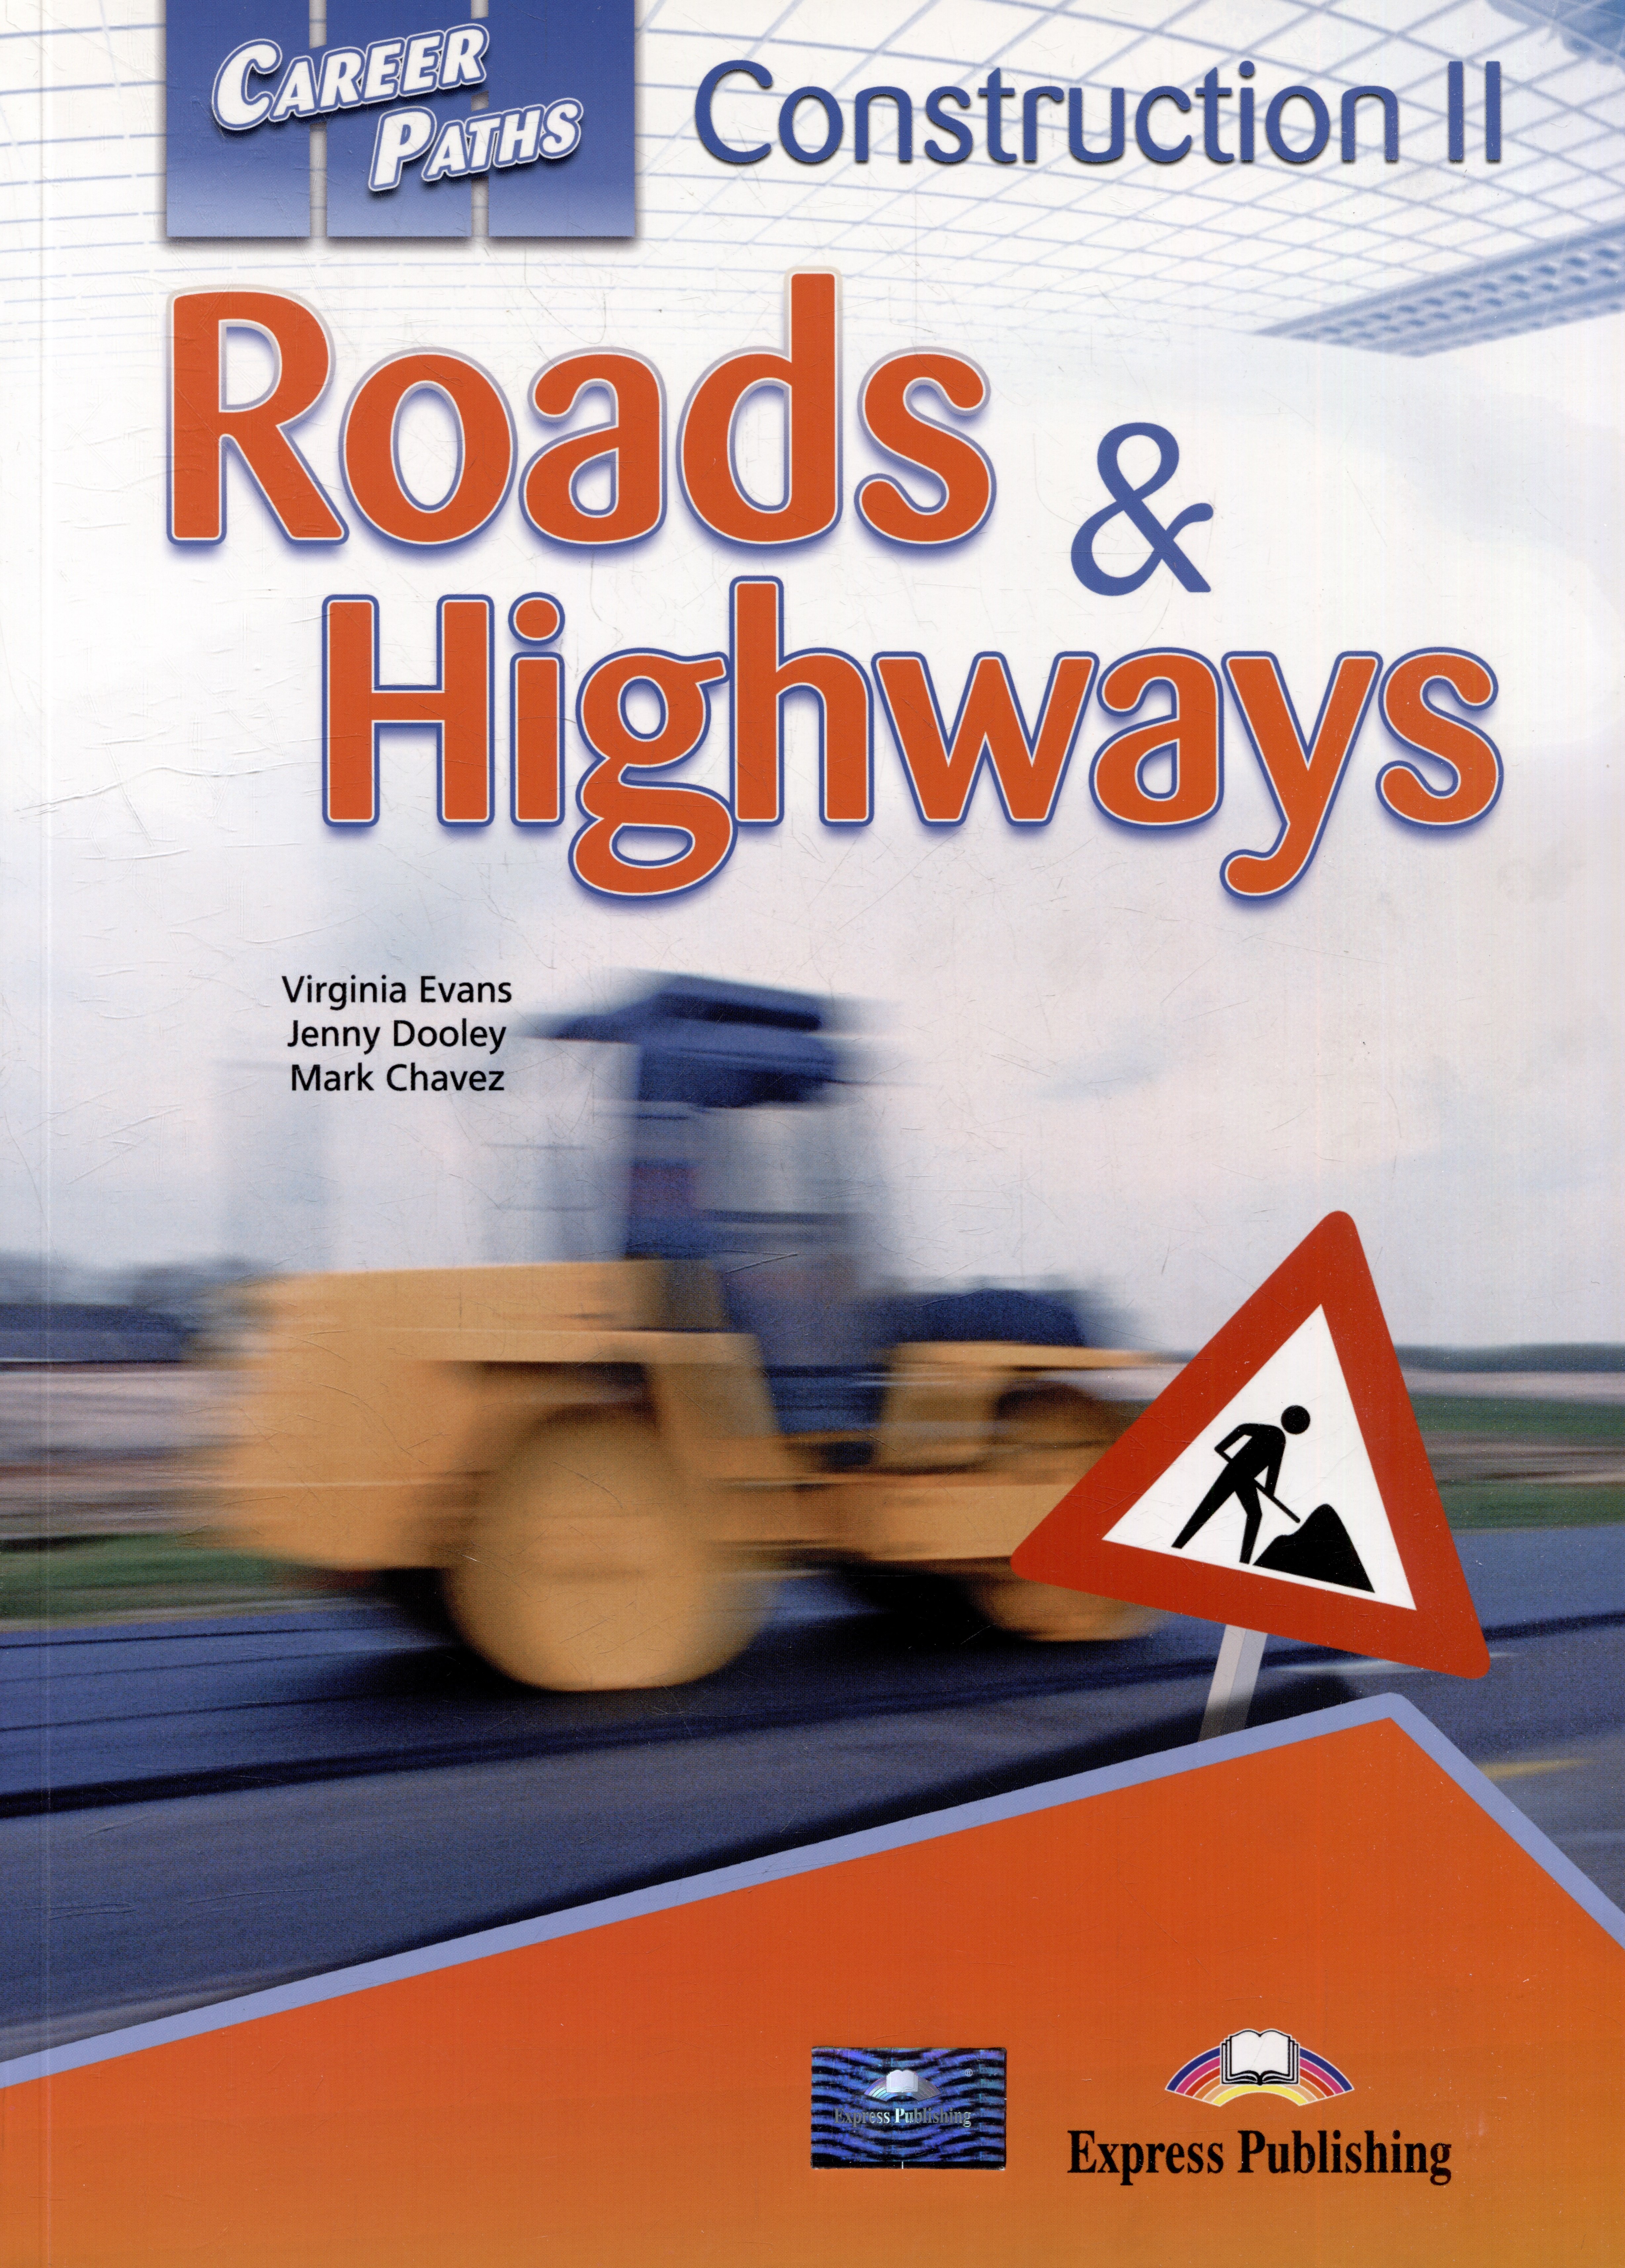 Career Paths Construction 2 Roads and Highways Students Book